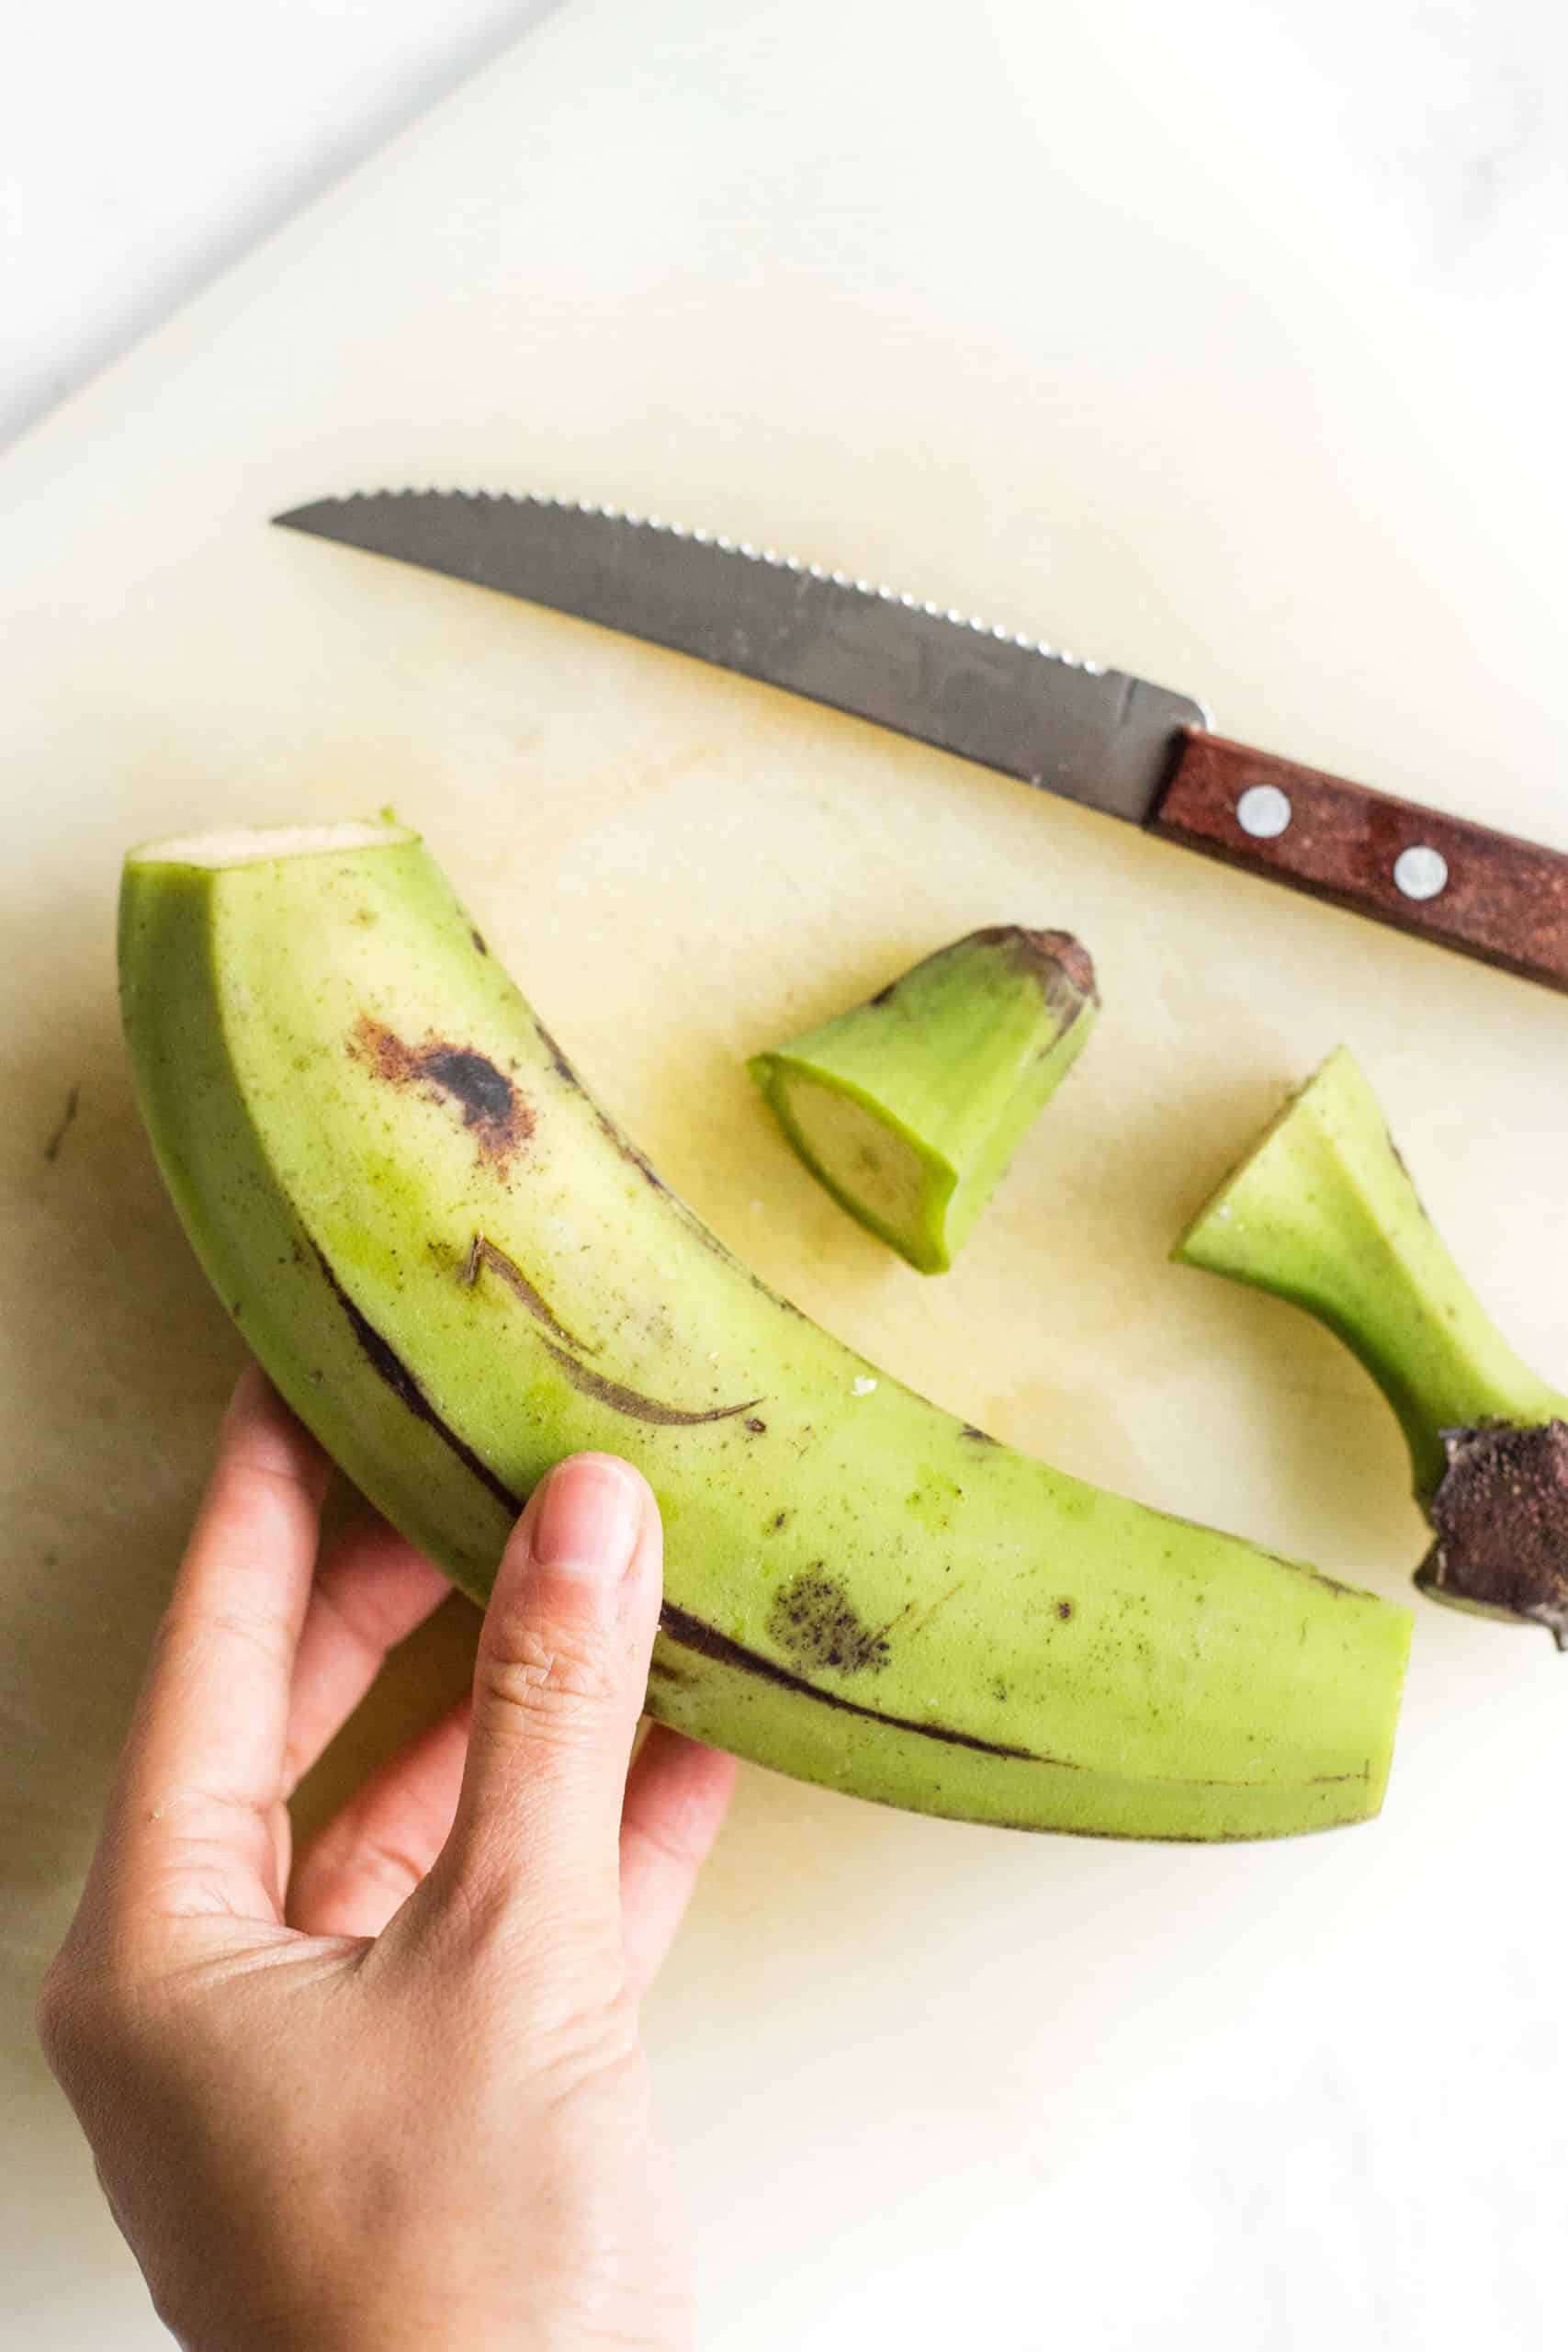 Holding a green plantain with its ends cut off.